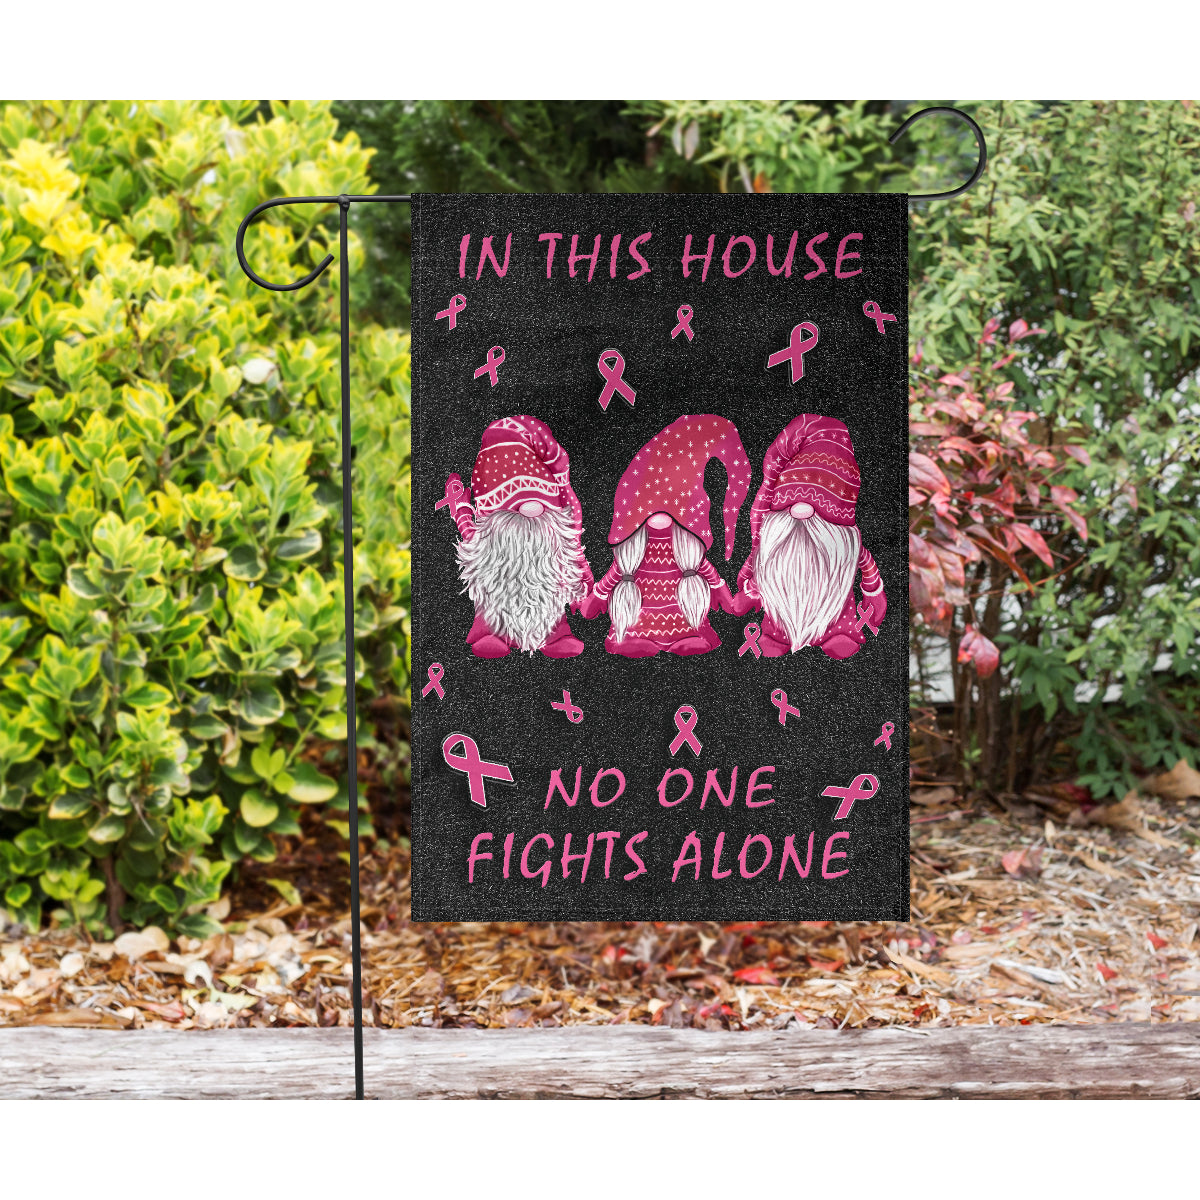 In This House We Never Give Up Flag Breast Cancer Awareness Garden Flag 0622